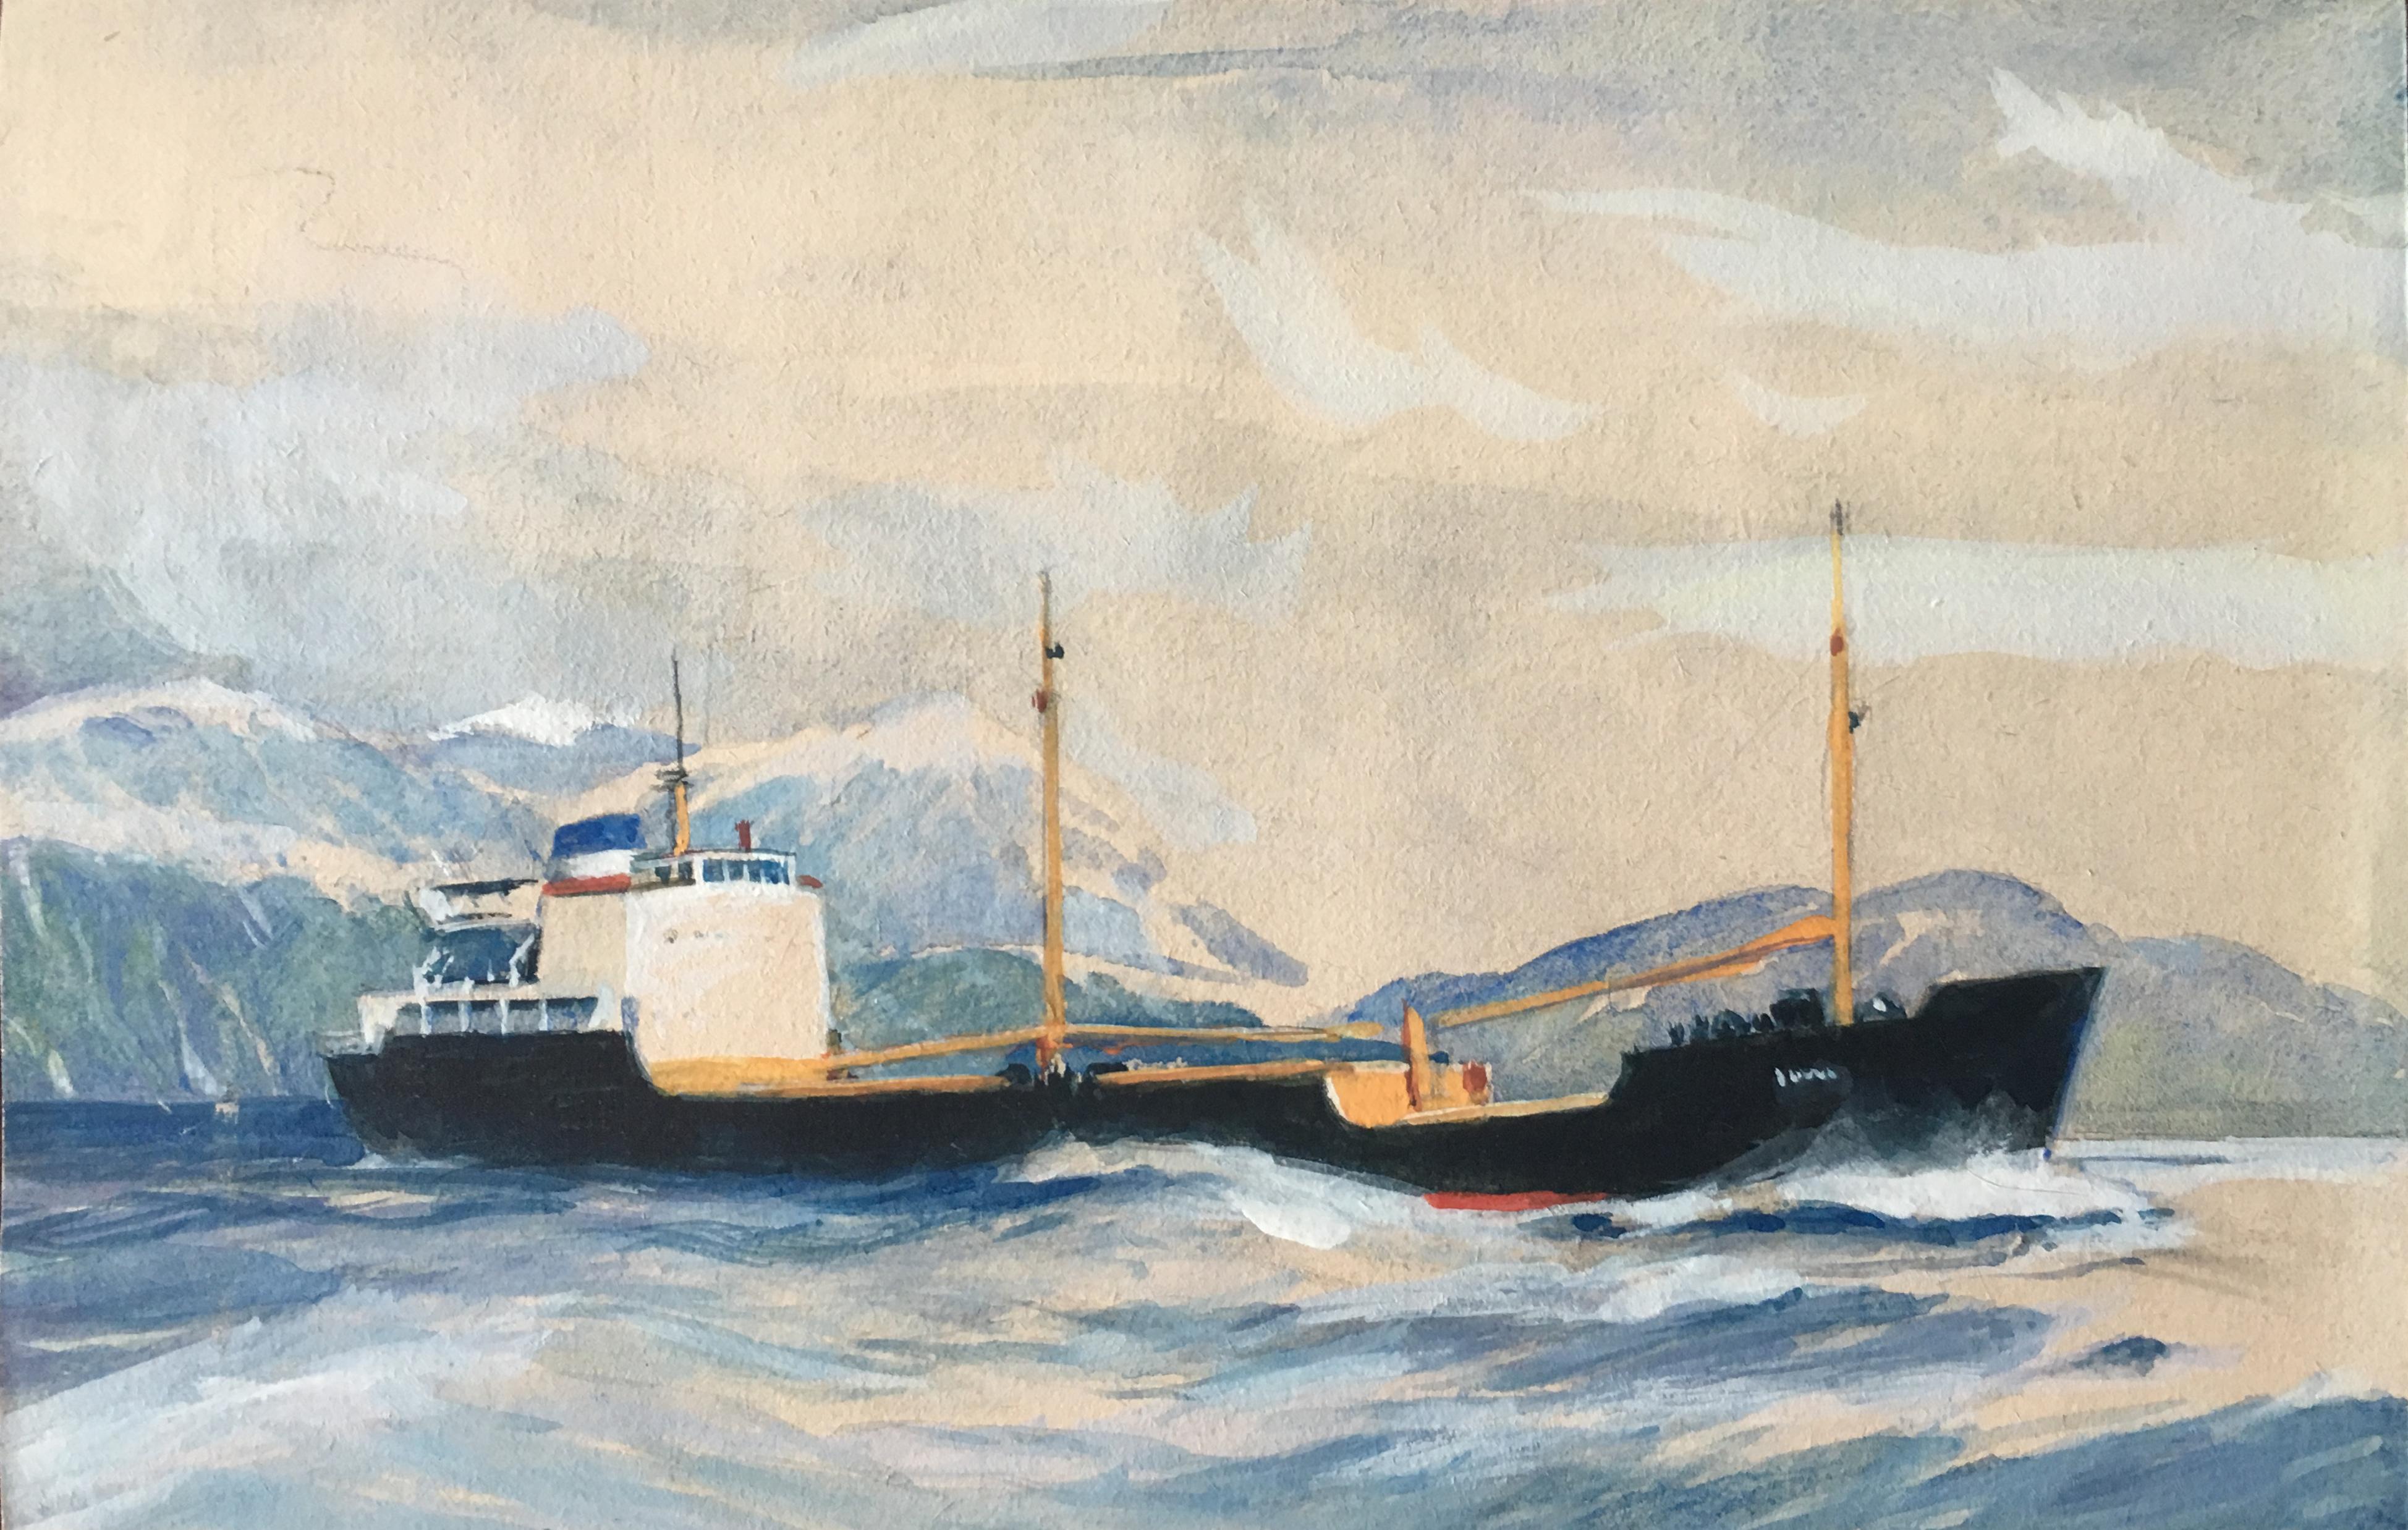 Laurence Dunn (1910-2006)
Otra
Gouache
11.5x18cm
Inscribed to reverse 'Rough sketch for painting of "Otra" commissioned for Capt. F.E. Eagle, whose favourite command she was' and signed 'Laurence Dunn'

The World Ship Society published the following